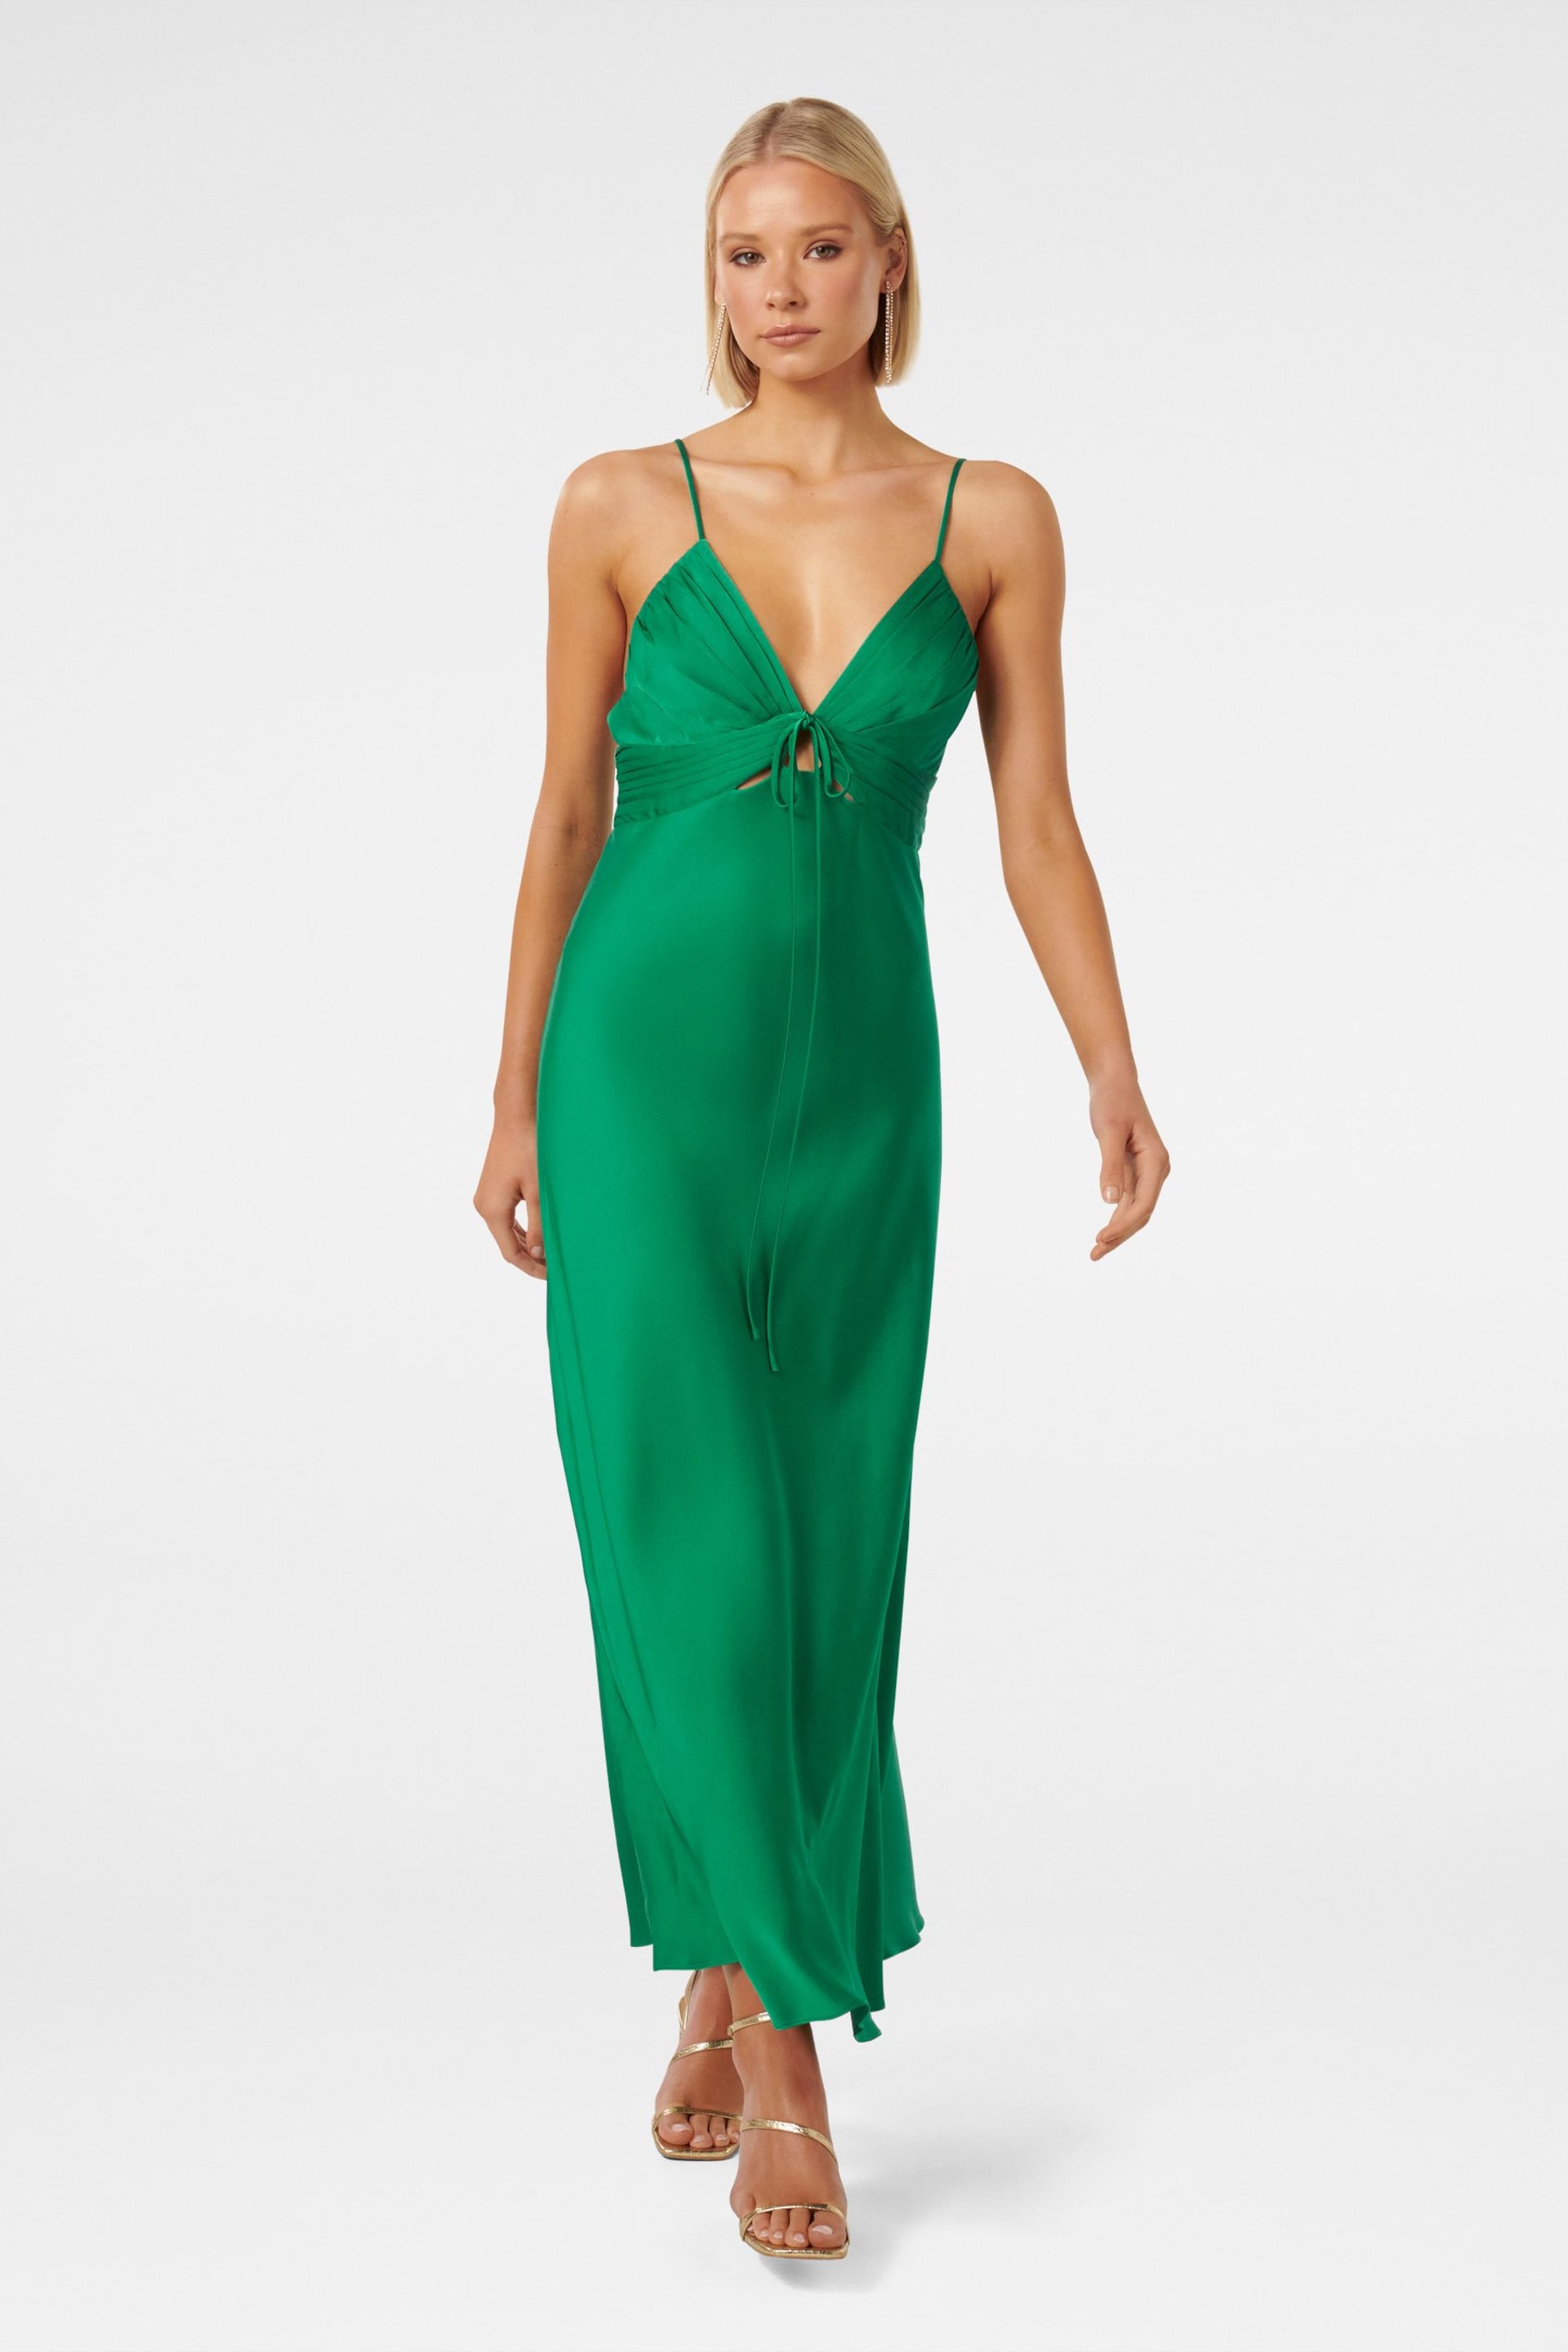 Forever New Green Cassia Satin Cutout Midi Dress - Image 1 of 4